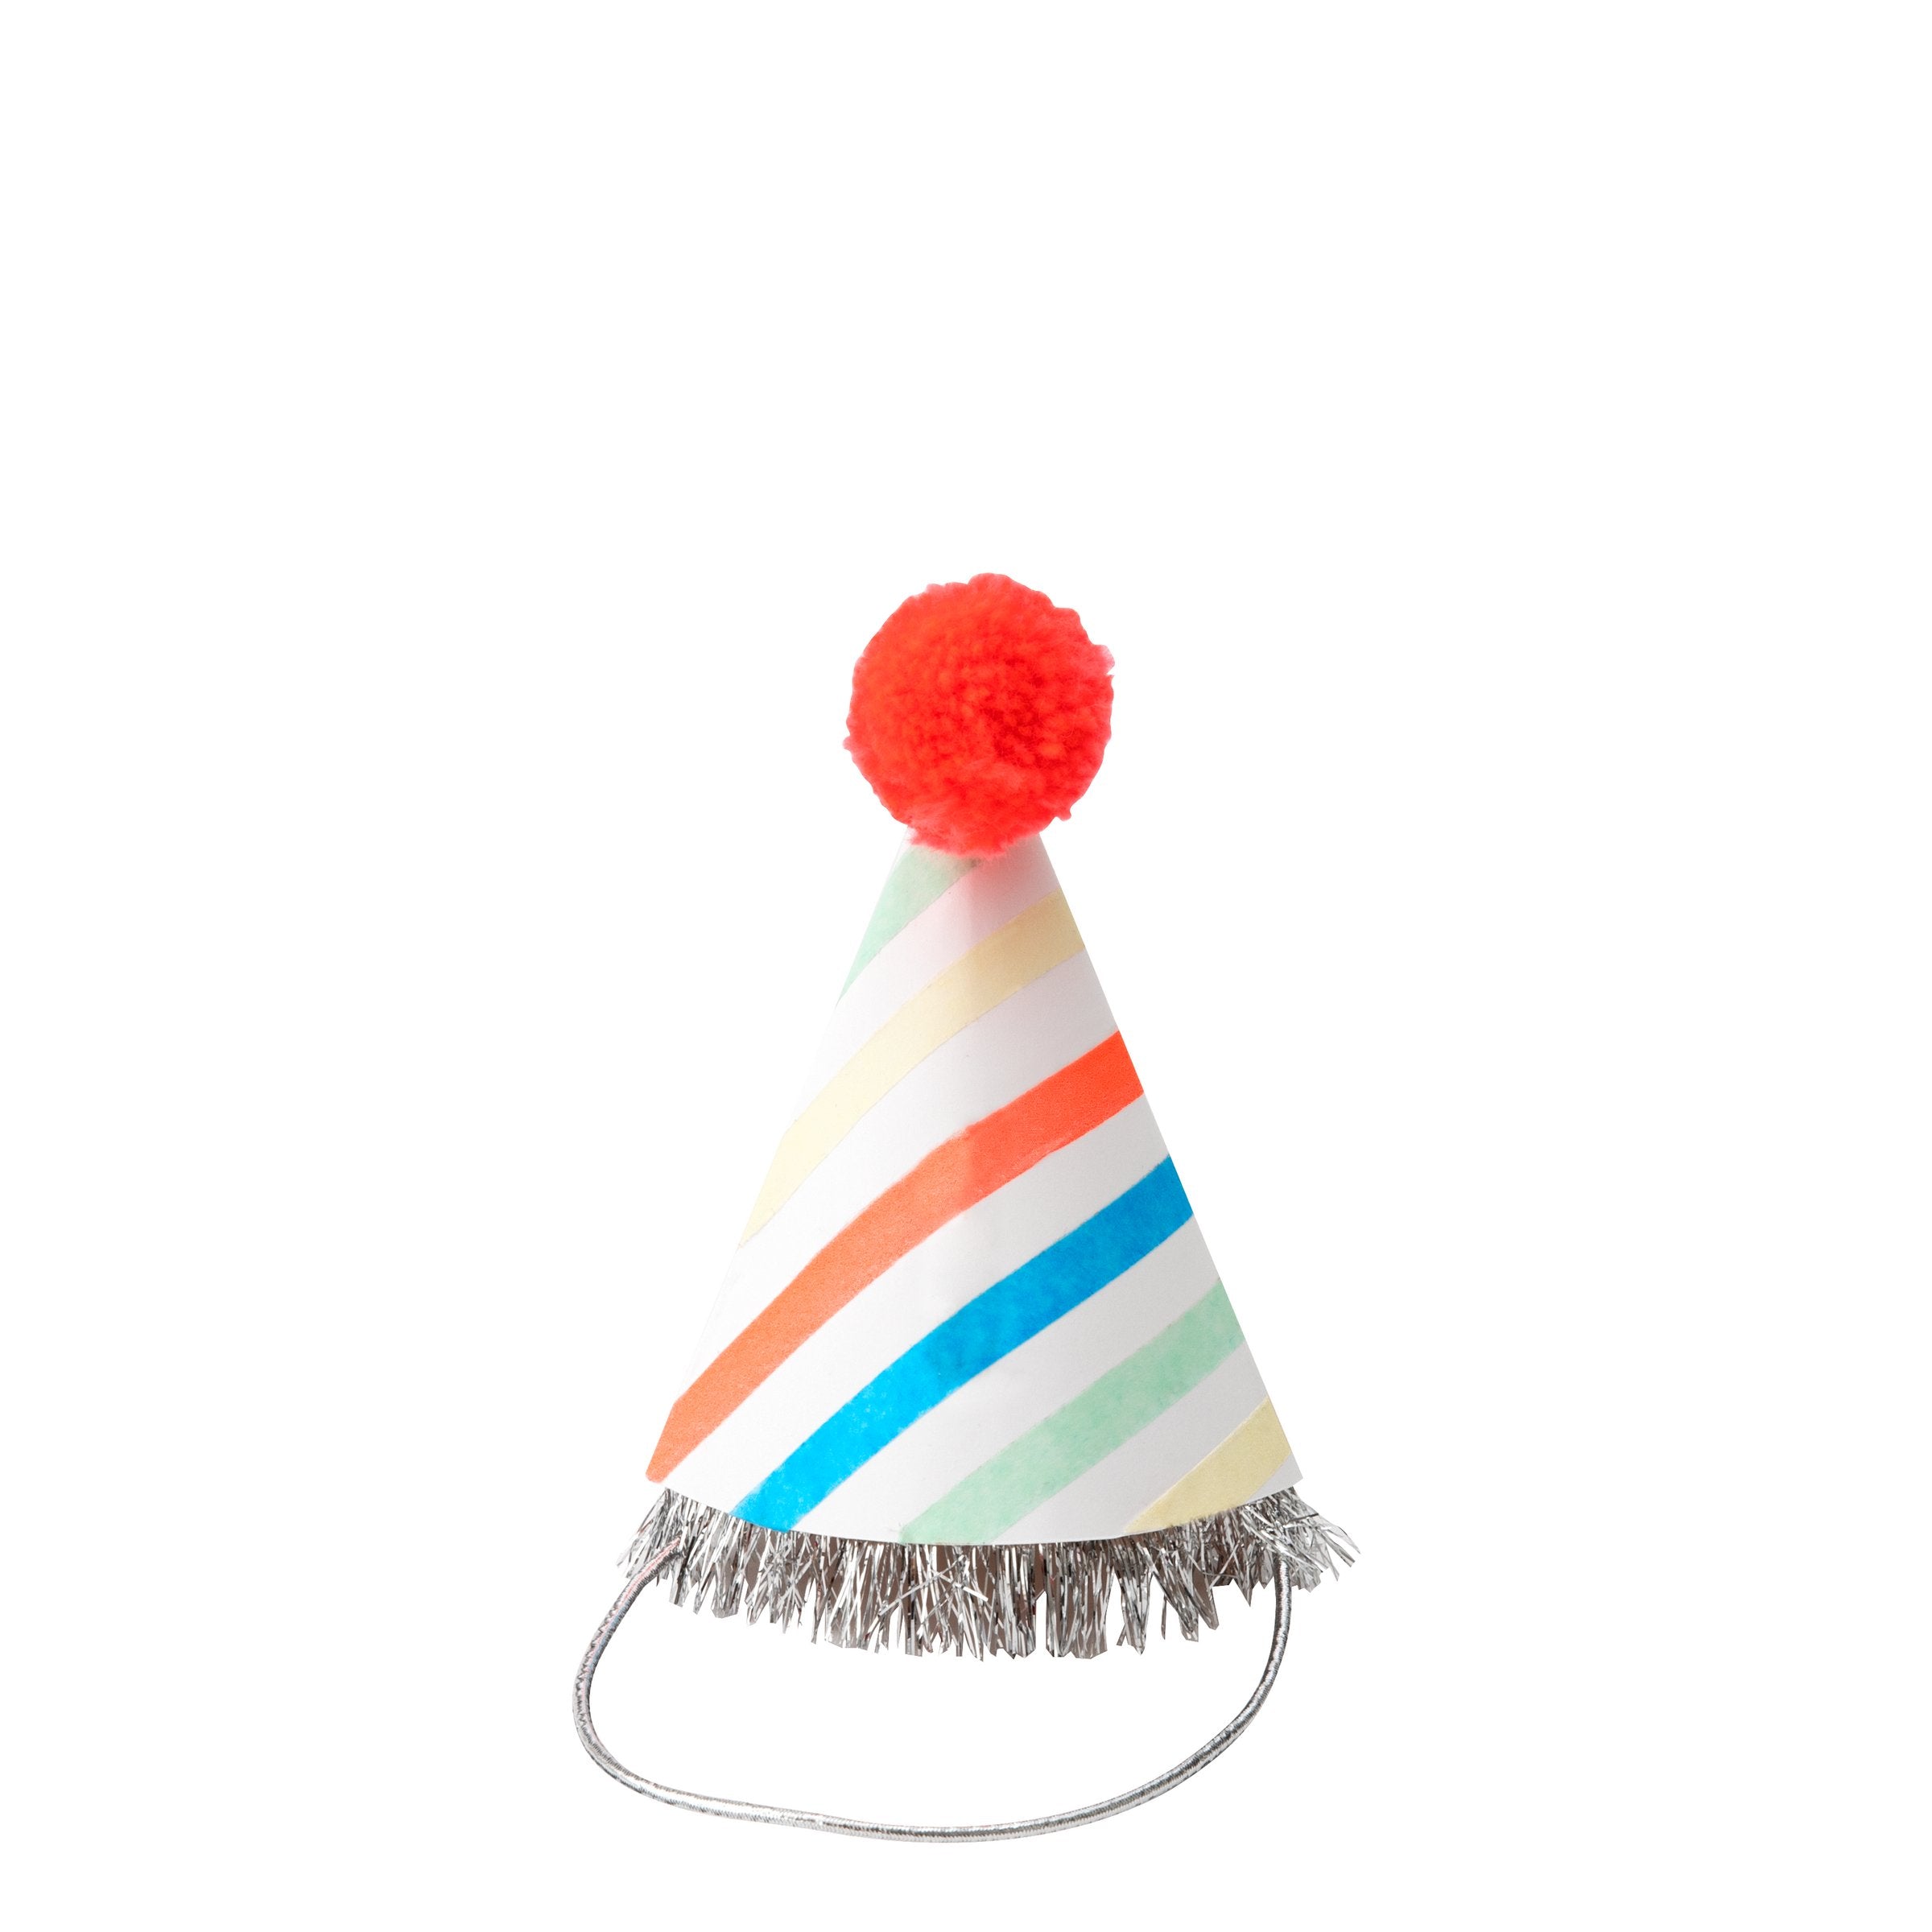 Our 3D card includes a birthday party hat to wear, colourful with a bright pompom, perfect for a special birthday celebration.